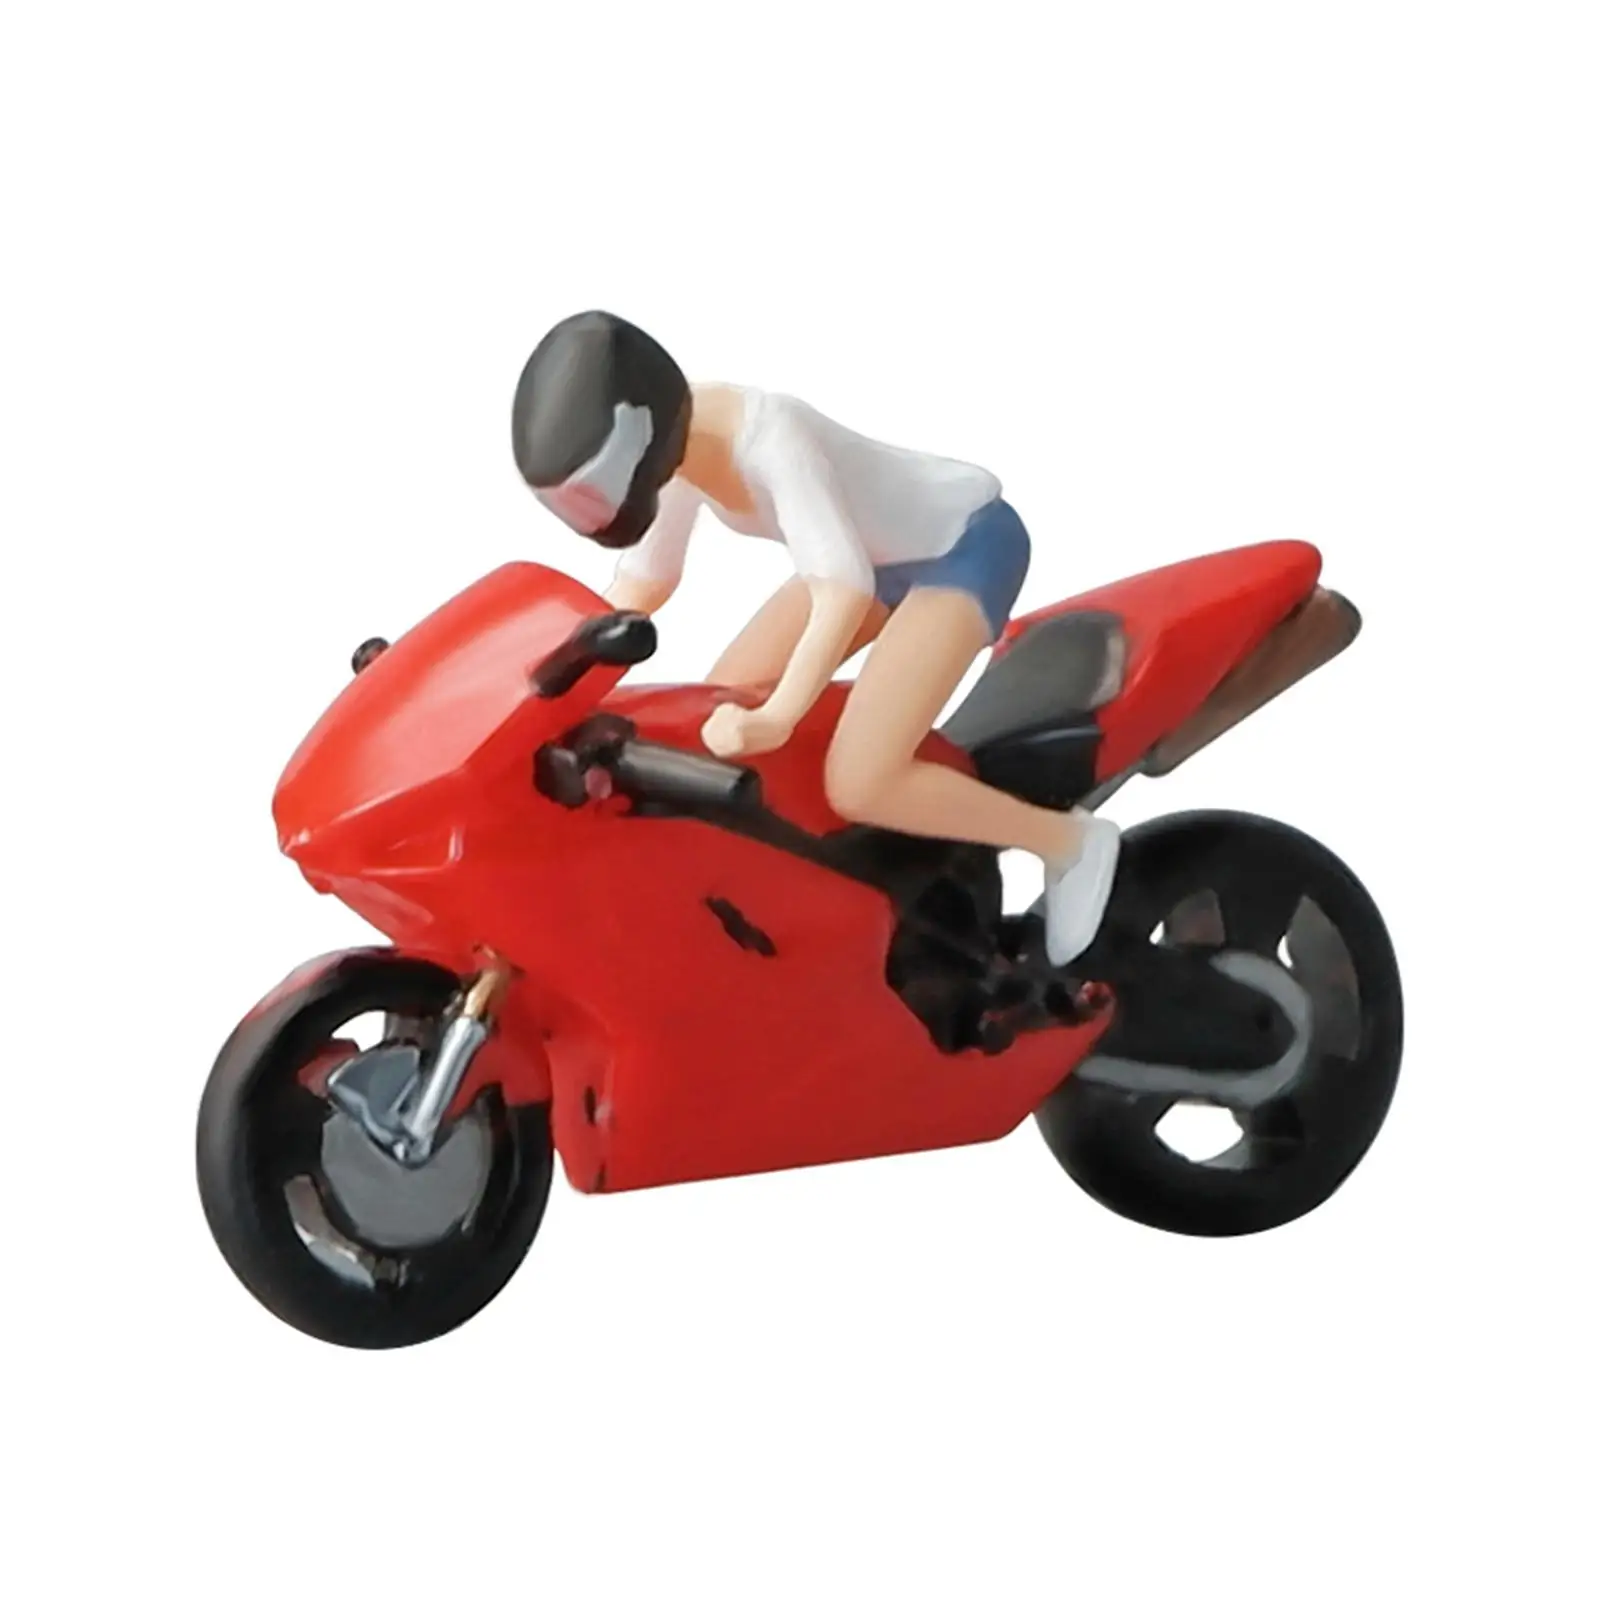 1/64 Motorcycle and Figures Model Mini People Model Movie Props Tiny People 1/64 Model People Figures DIY Projects Accessory